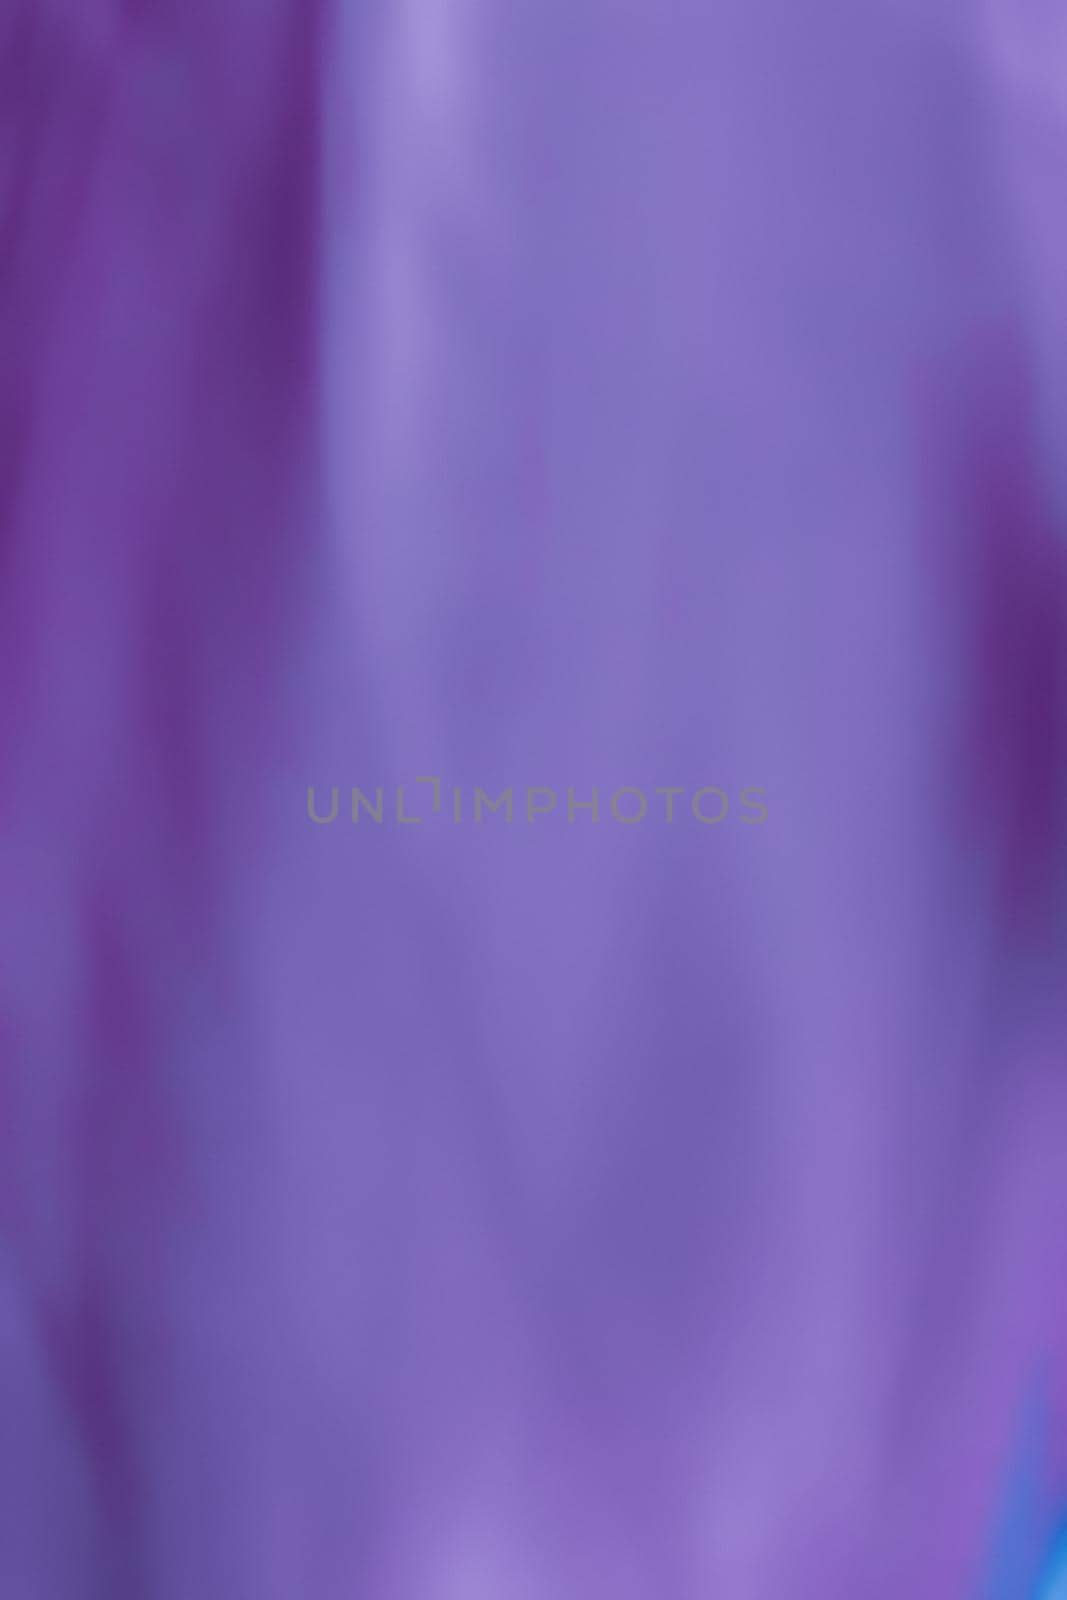 Holiday branding, beauty veil and glamour backdrop concept - Purple abstract art background, silk texture and wave lines in motion for classic luxury design